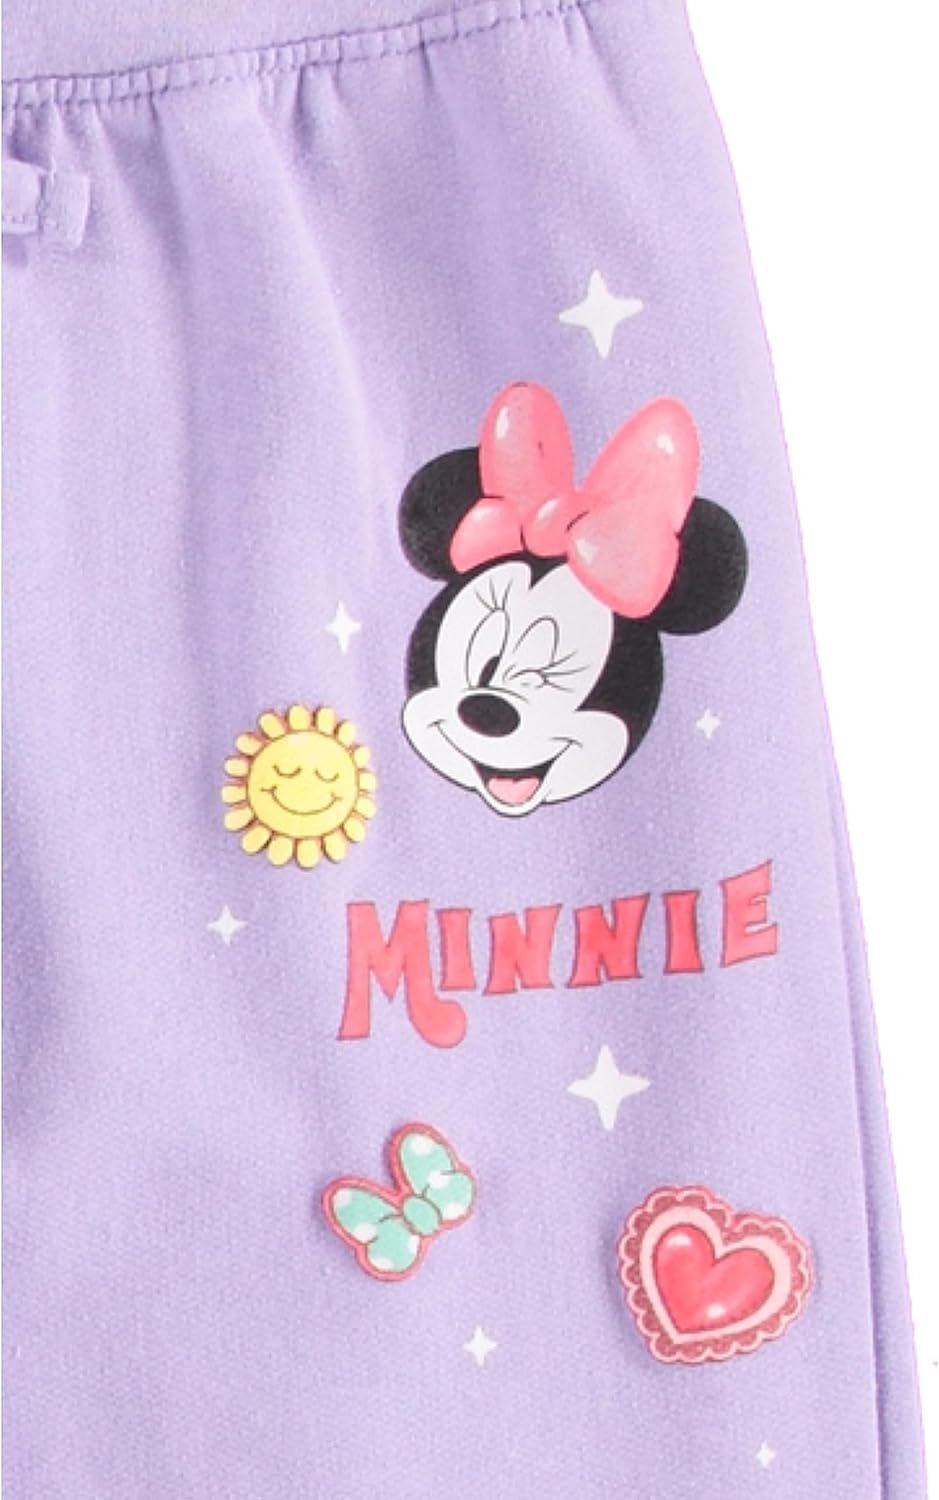  Disney Minnie Mouse Girls' 2 Pack Jogger Pants for